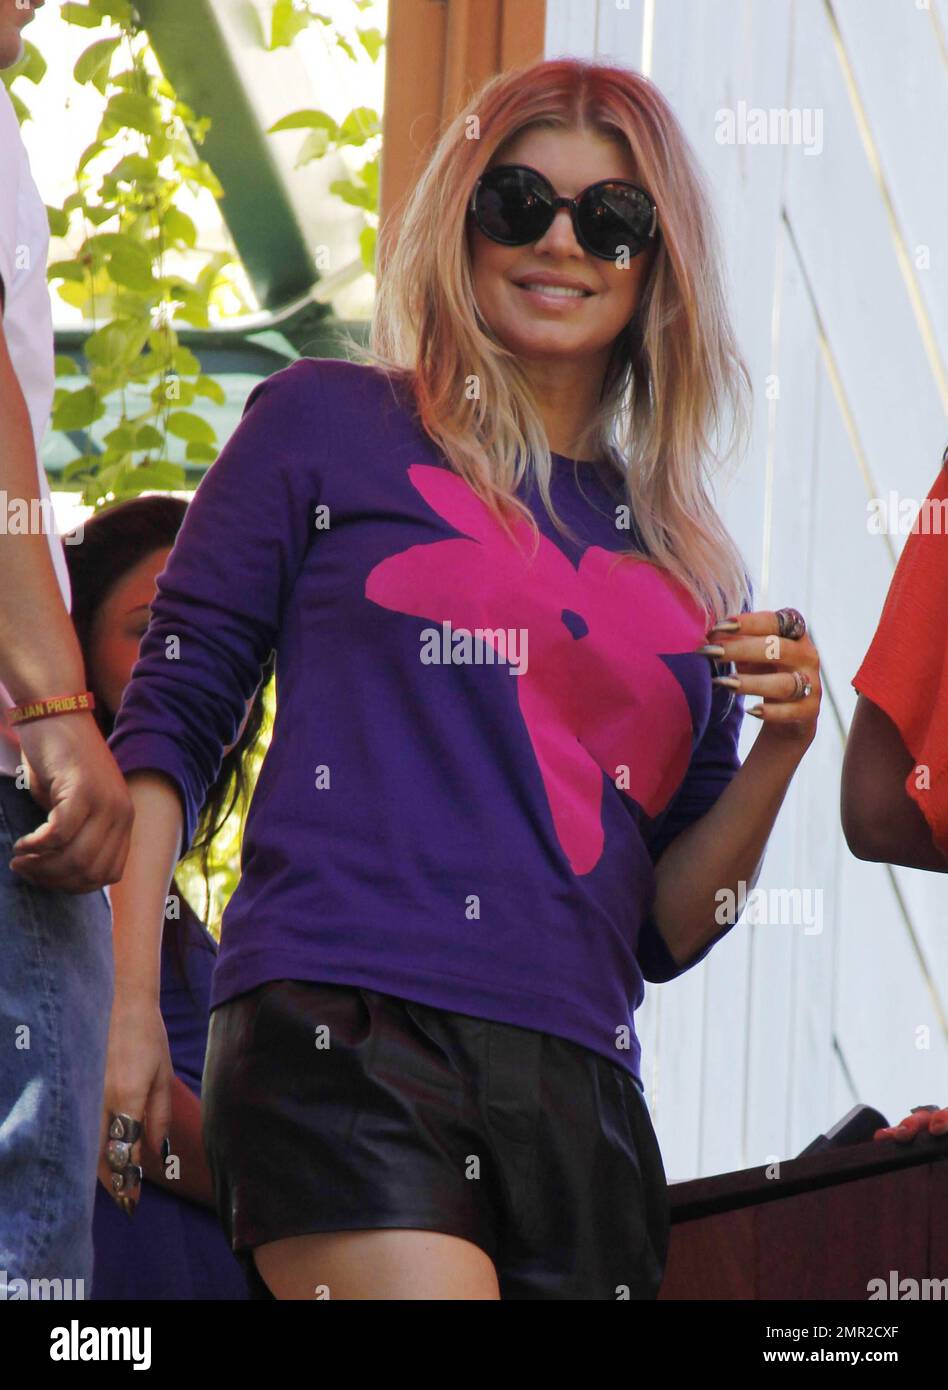 Wearing a purple sweater with a big pink flower design and black shorts, Fergie waves as she makes an appearance for an interview with Maria Menounos at Planet Dailies at The Grove shopping center. Los Angeles, CA. 16th October 2012. Stock Photo